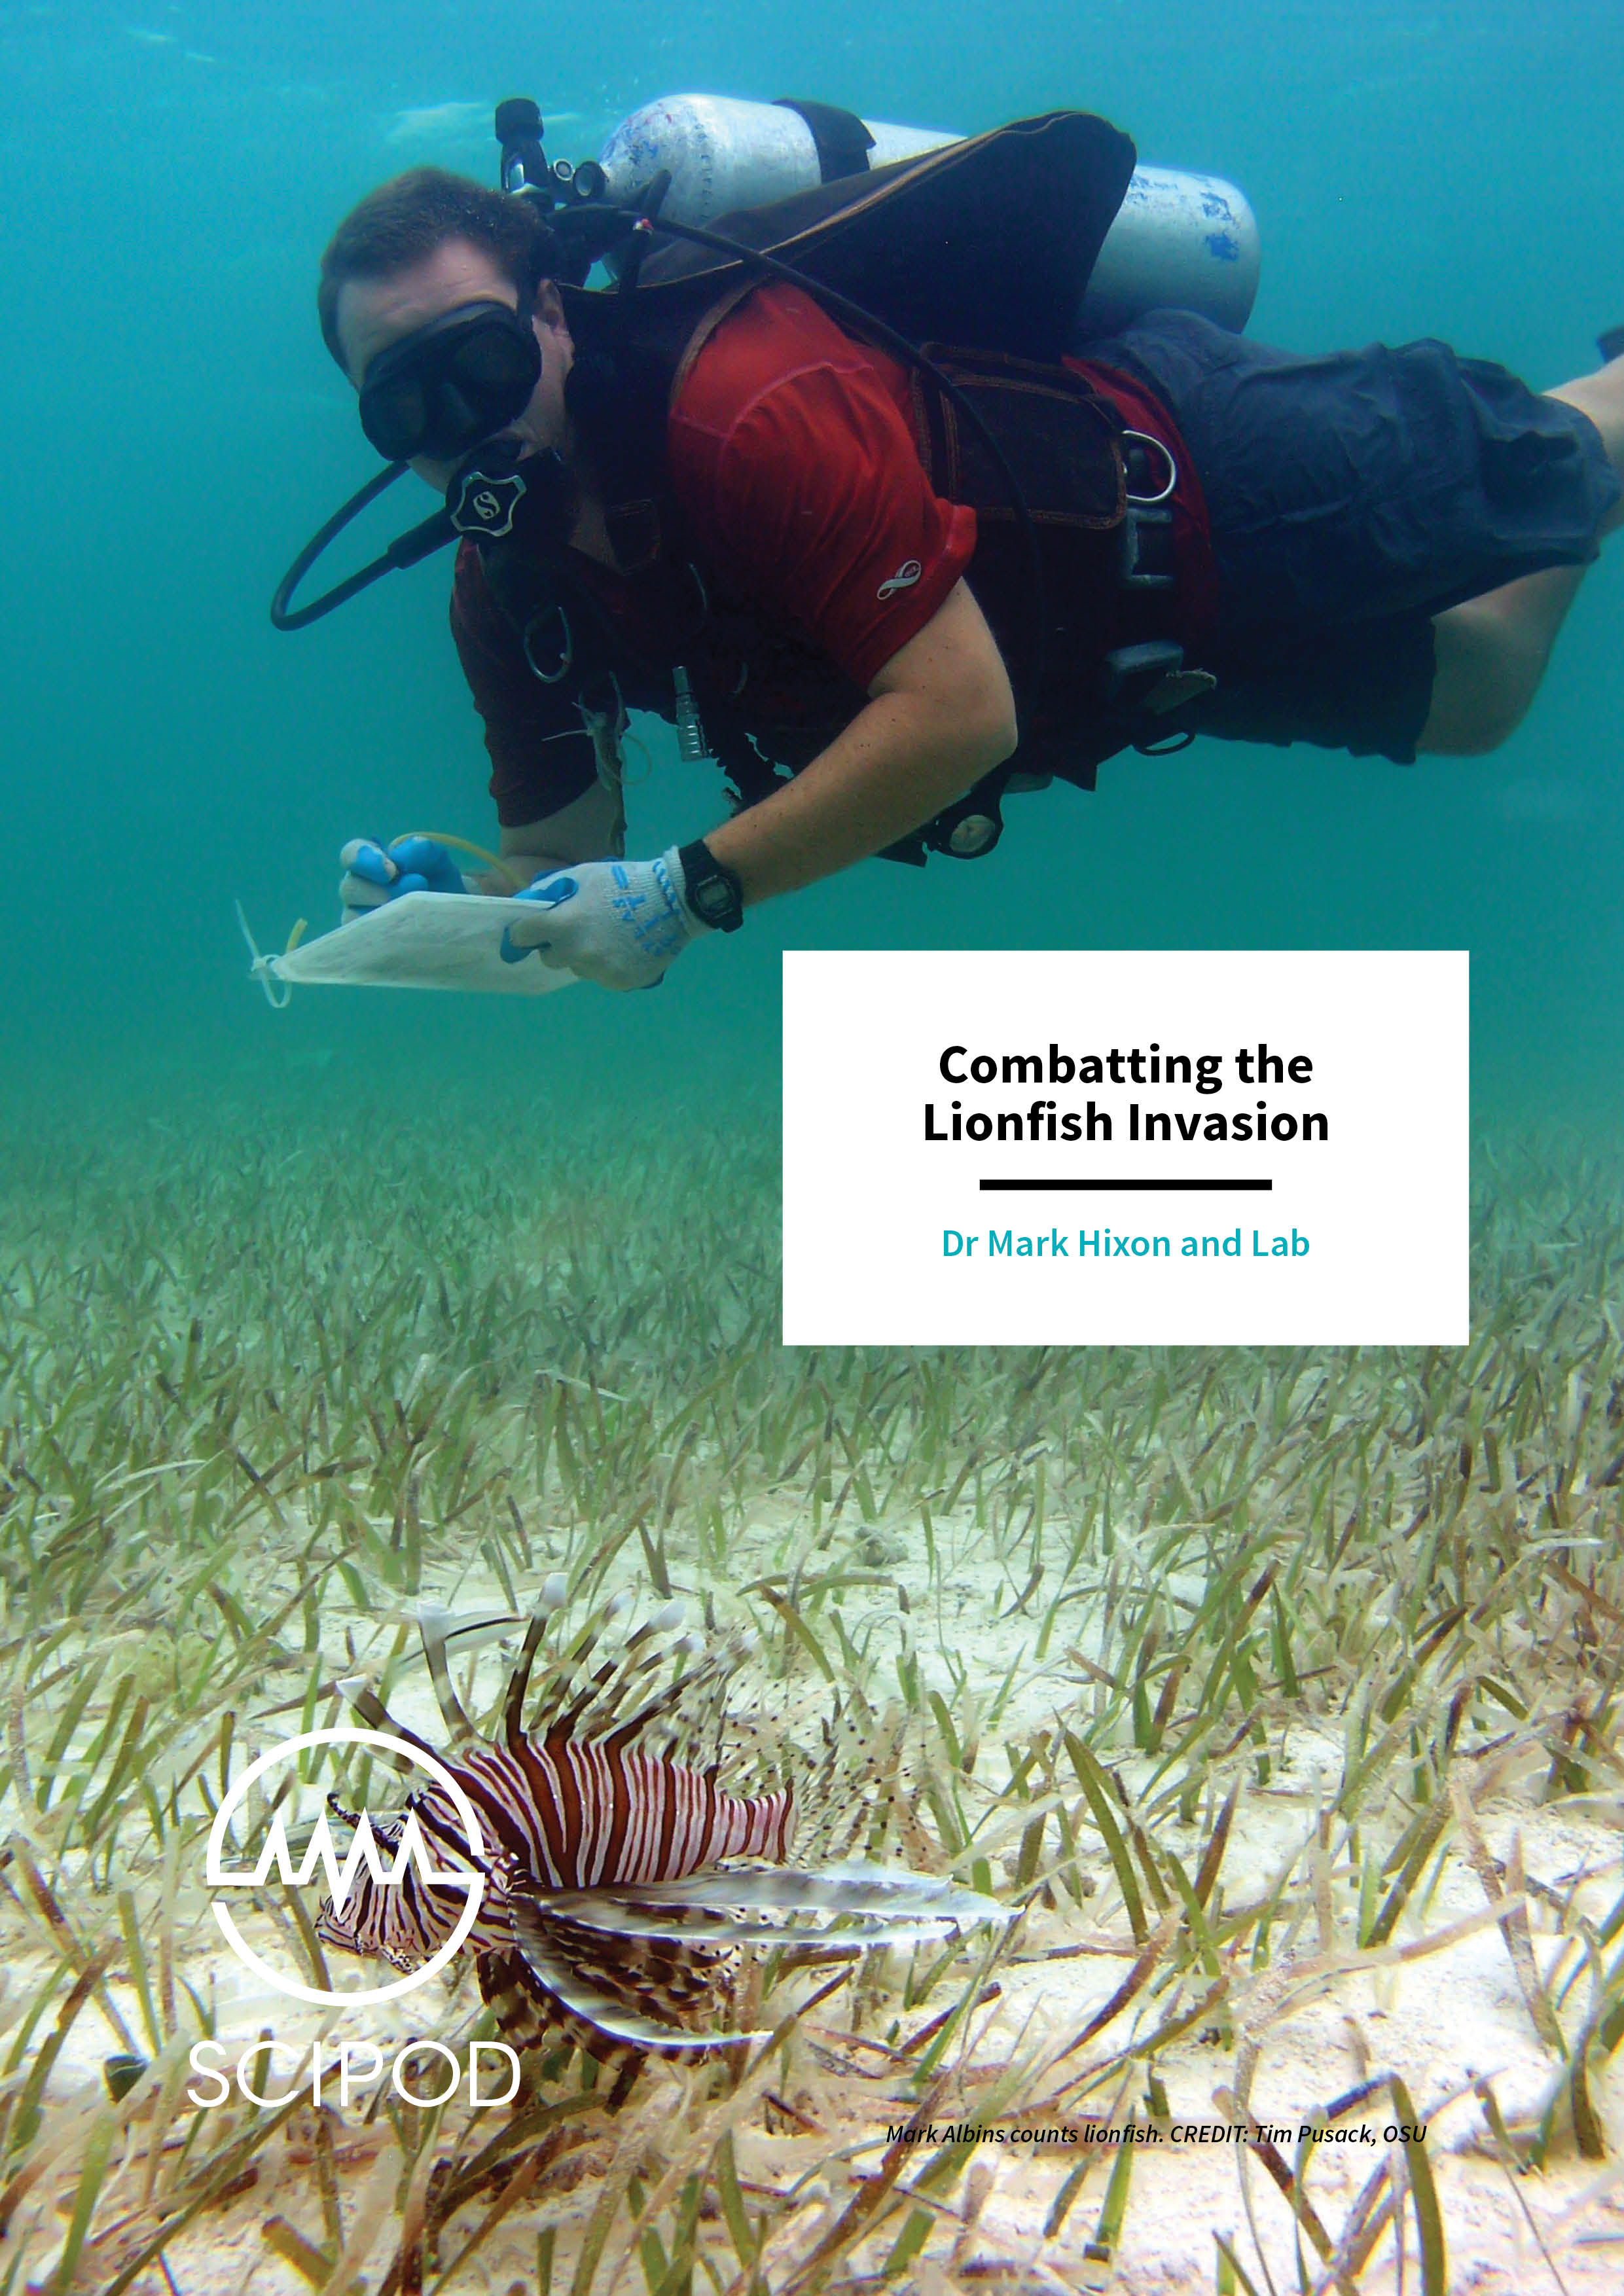 Combatting the Lionfish Invasion – Dr Mark Hixon and Lab, University of Hawaii